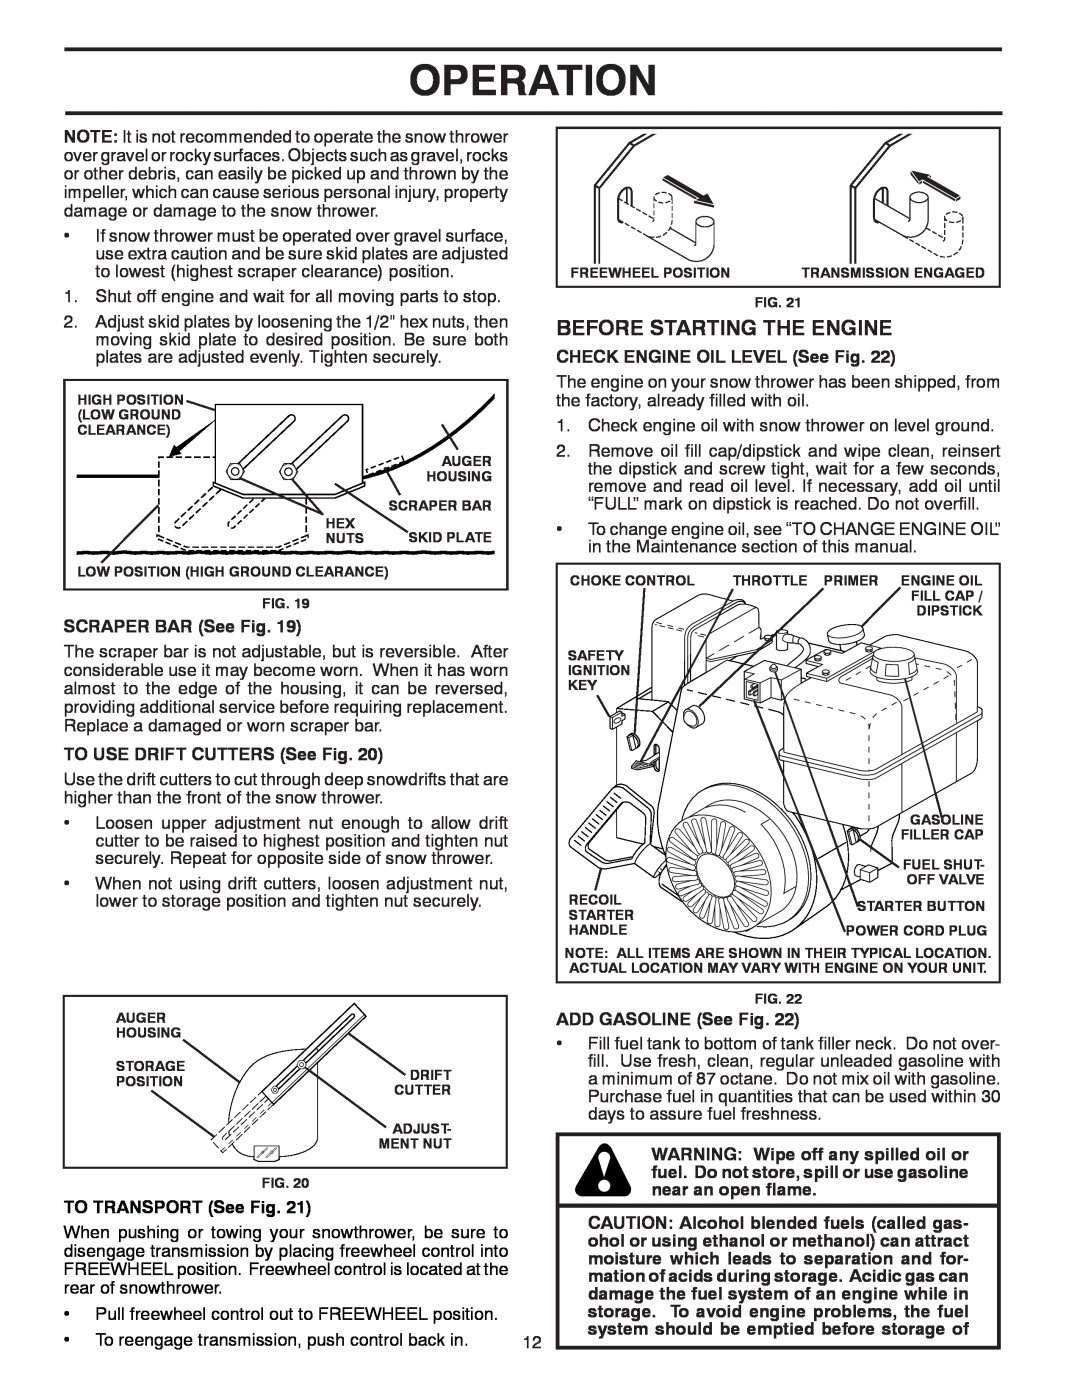 Poulan 416751, 96198000901 Before Starting The Engine, Operation, CHECK ENGINE OIL LEVEL See Fig, SCRAPER BAR See Fig 